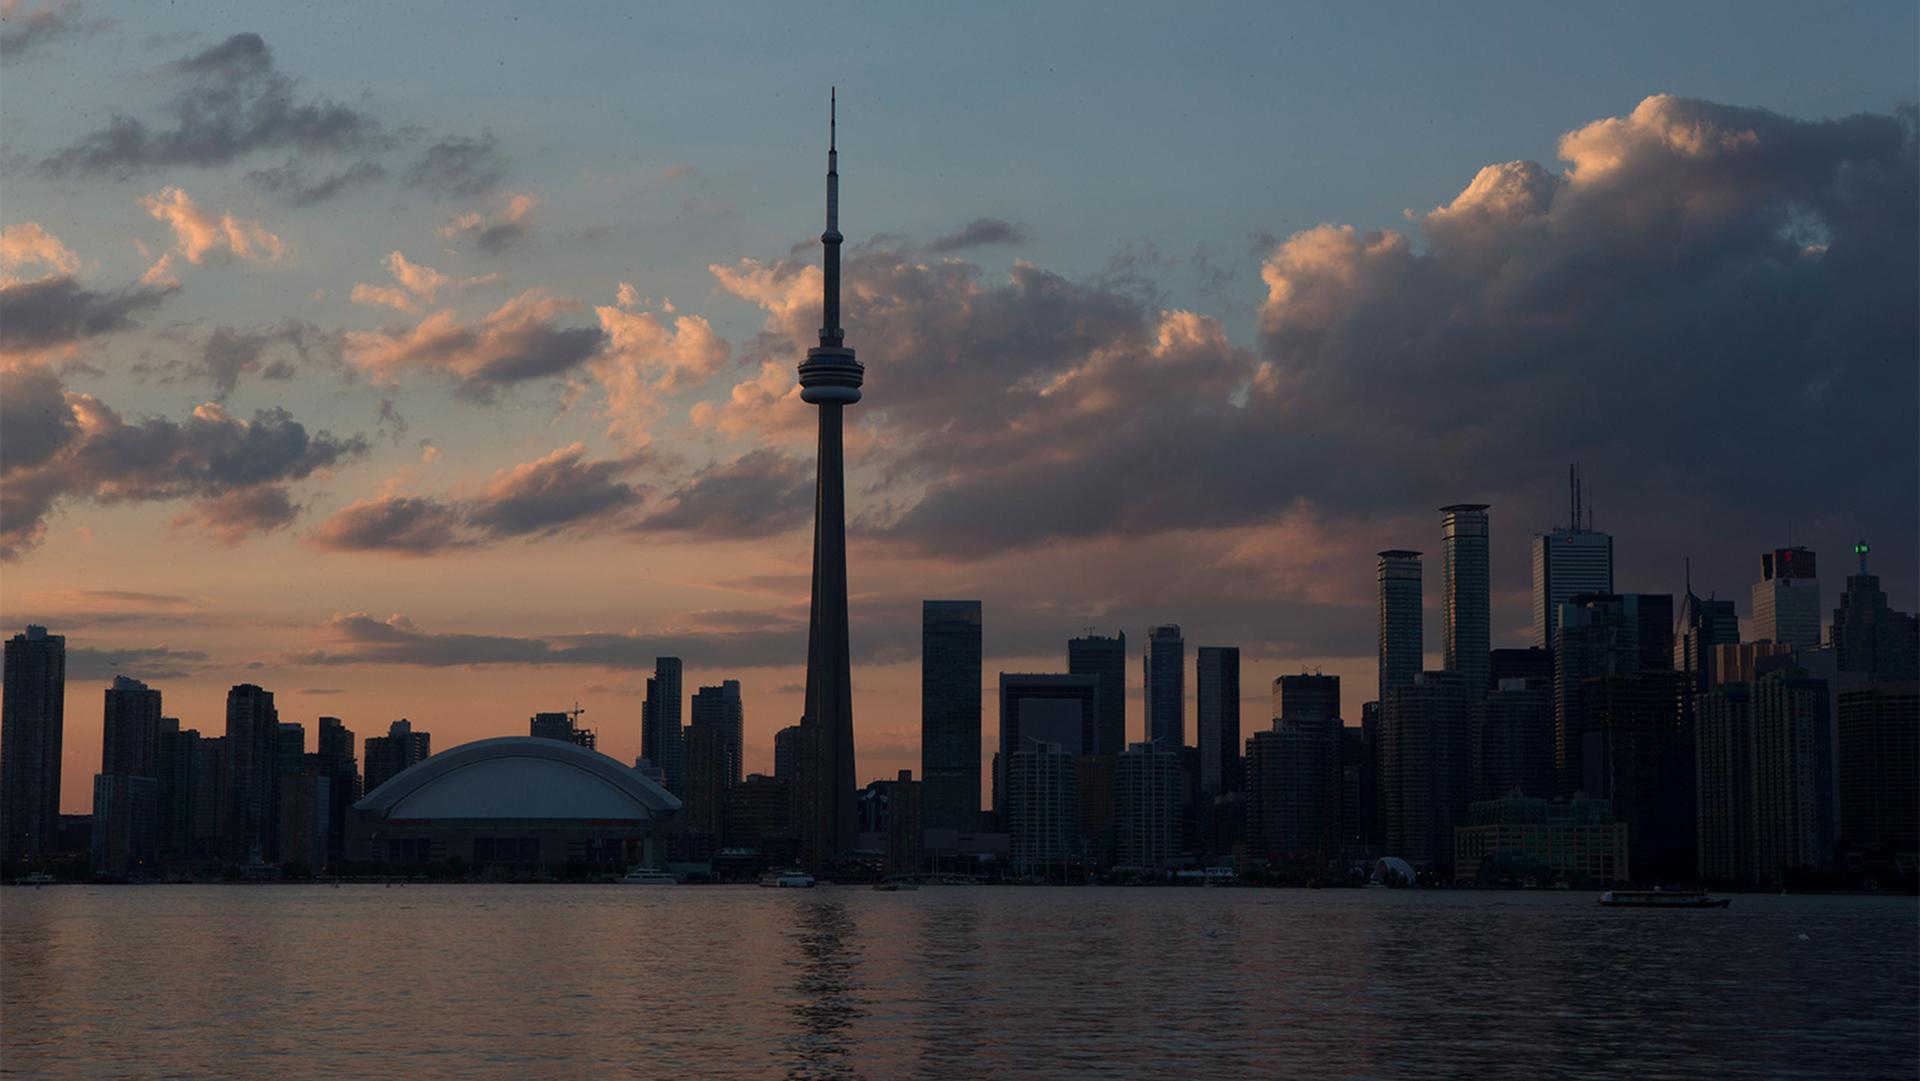 The sun sets over the Toronto skyline during the opening ceremony for the Pan Am Games